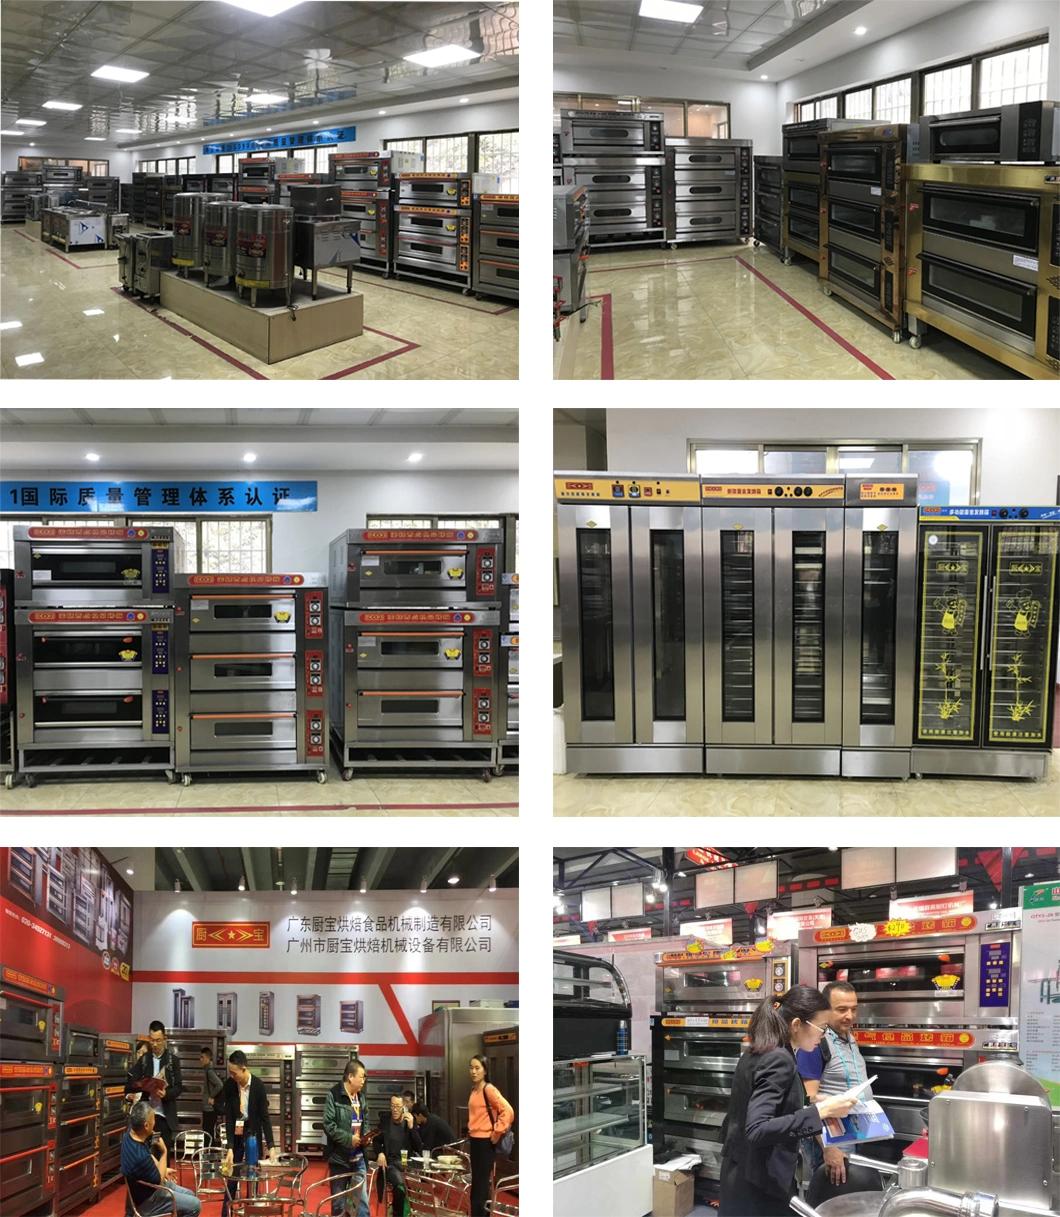 4 Deck 16 Trays Electric Oven for Commercial Kitchen Baking Equipment Bakery Machinery Bread Machine